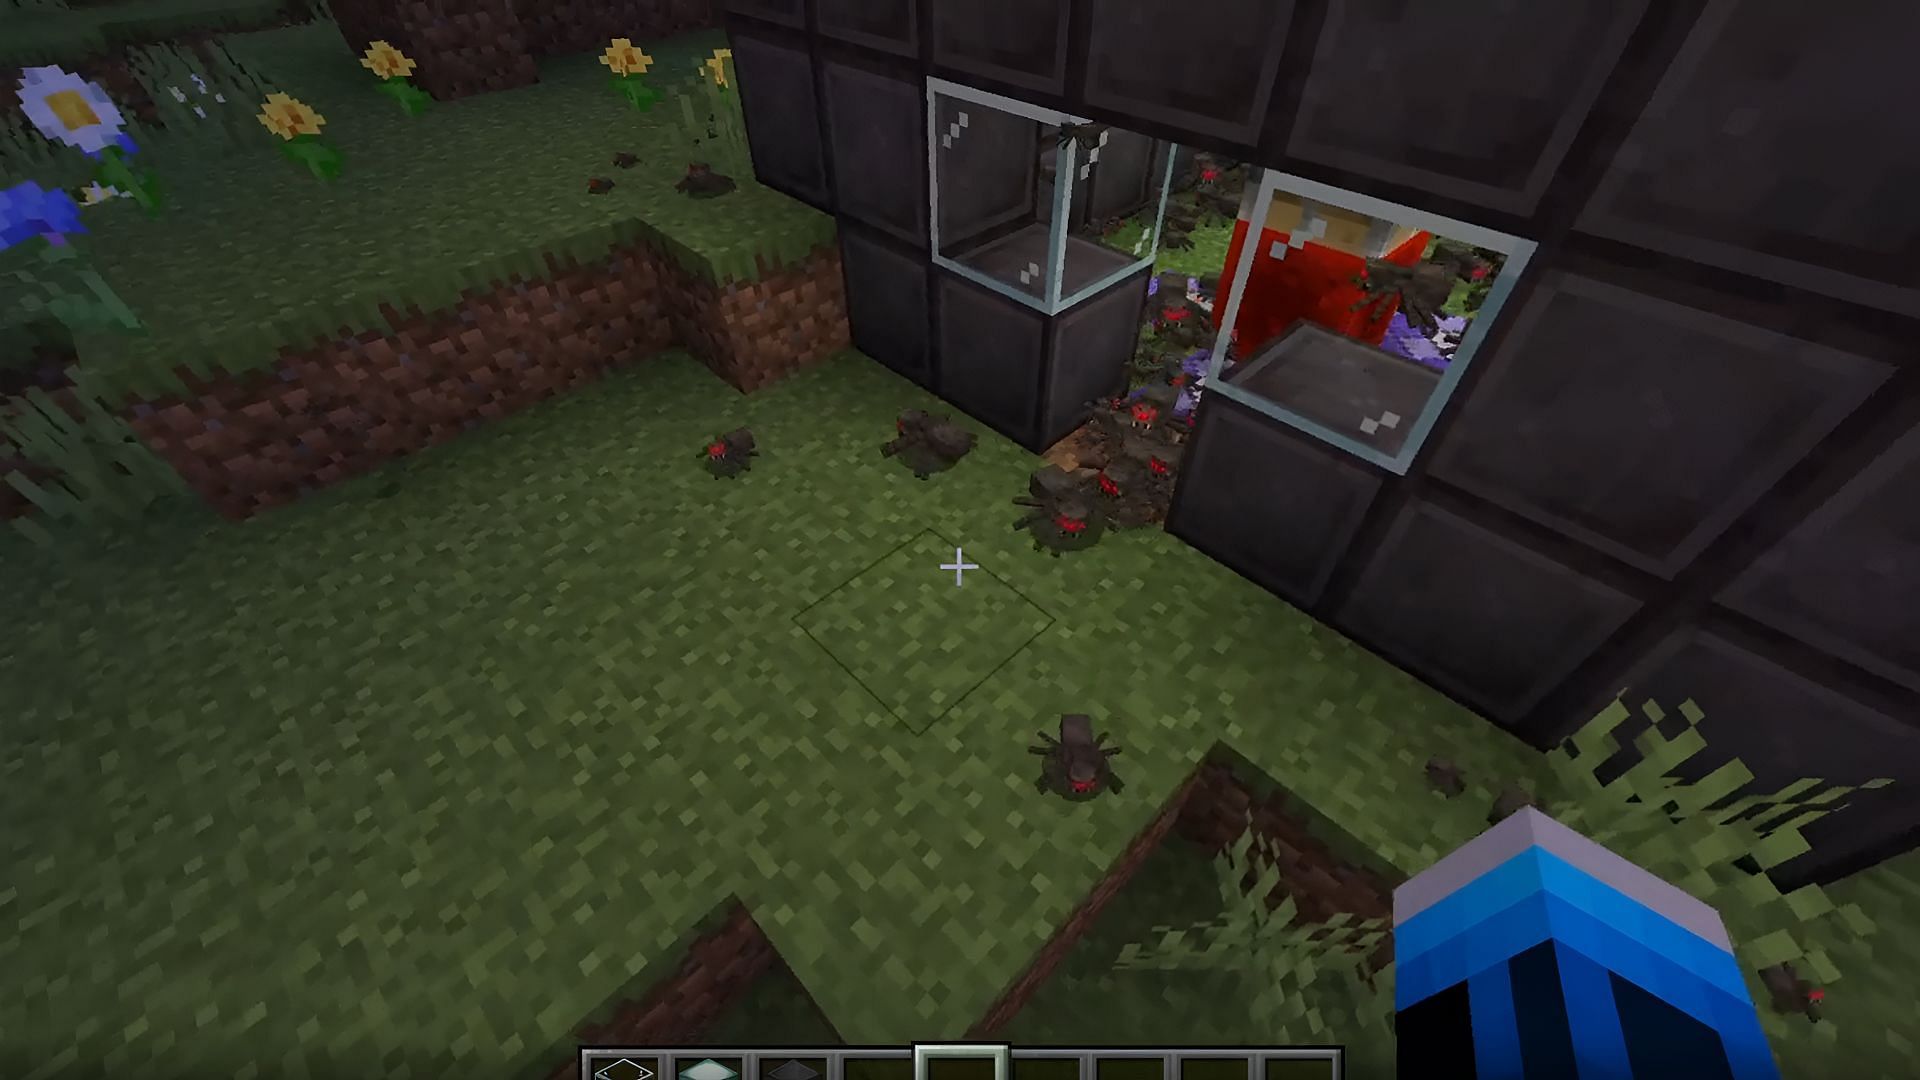 A Minecraft fan discovered that a new command attribute allows for smaller mobs, including spiders.